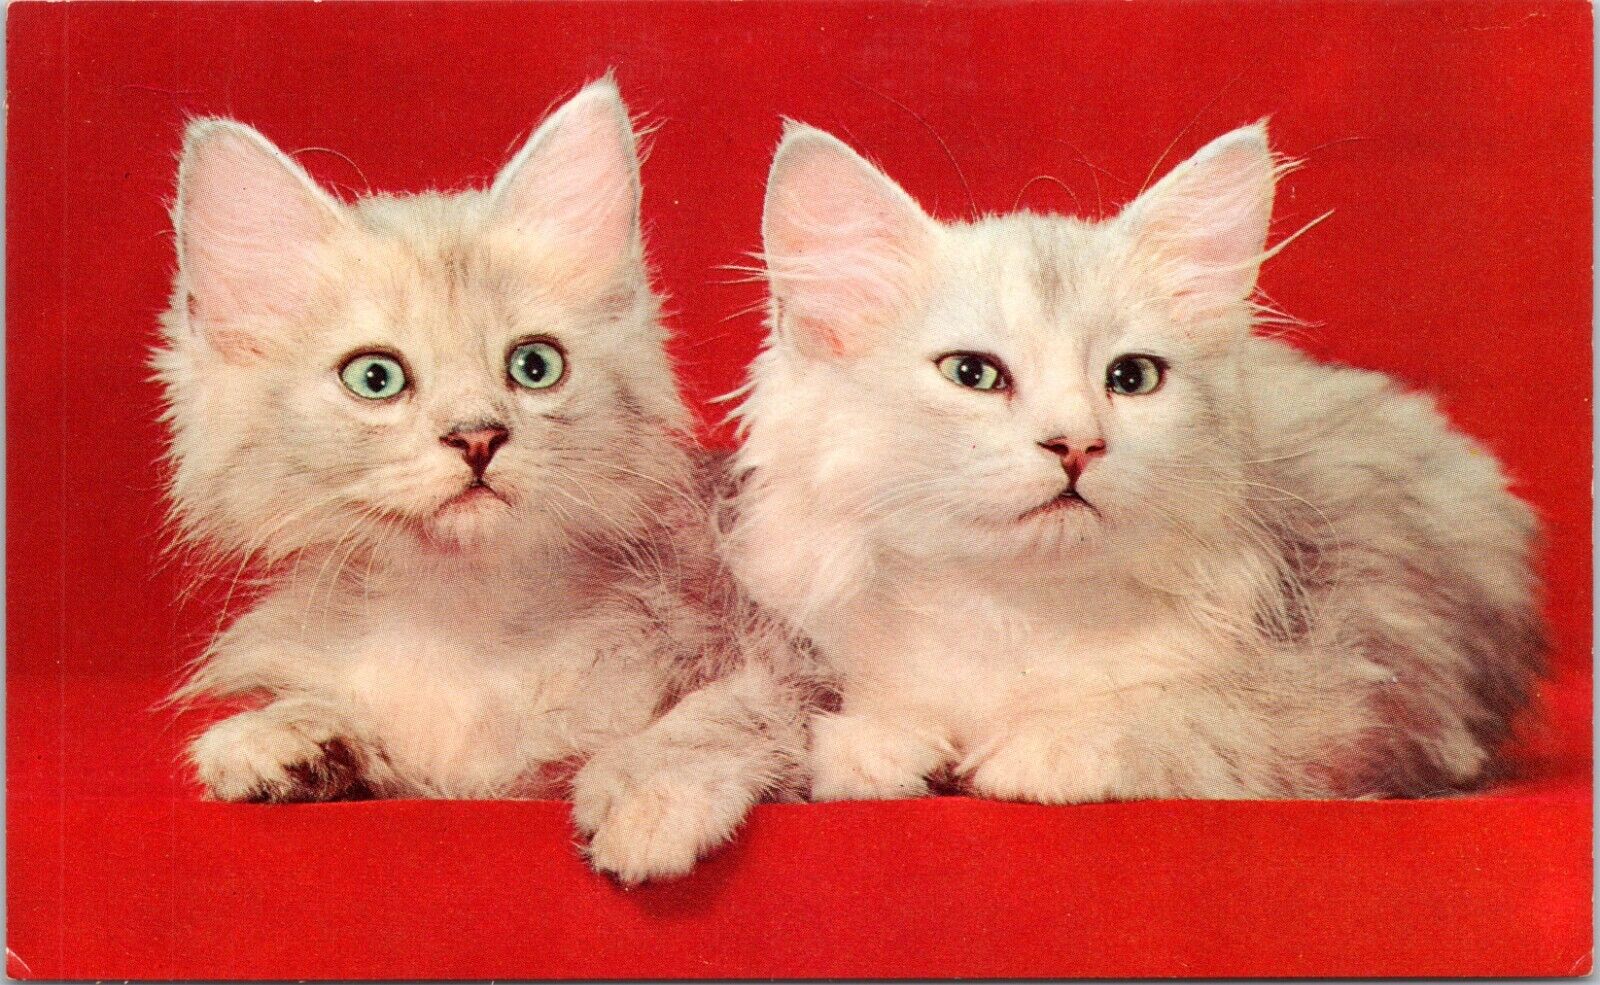 c1950s, Mr. and Mrs. sweet cats, nice vintage card